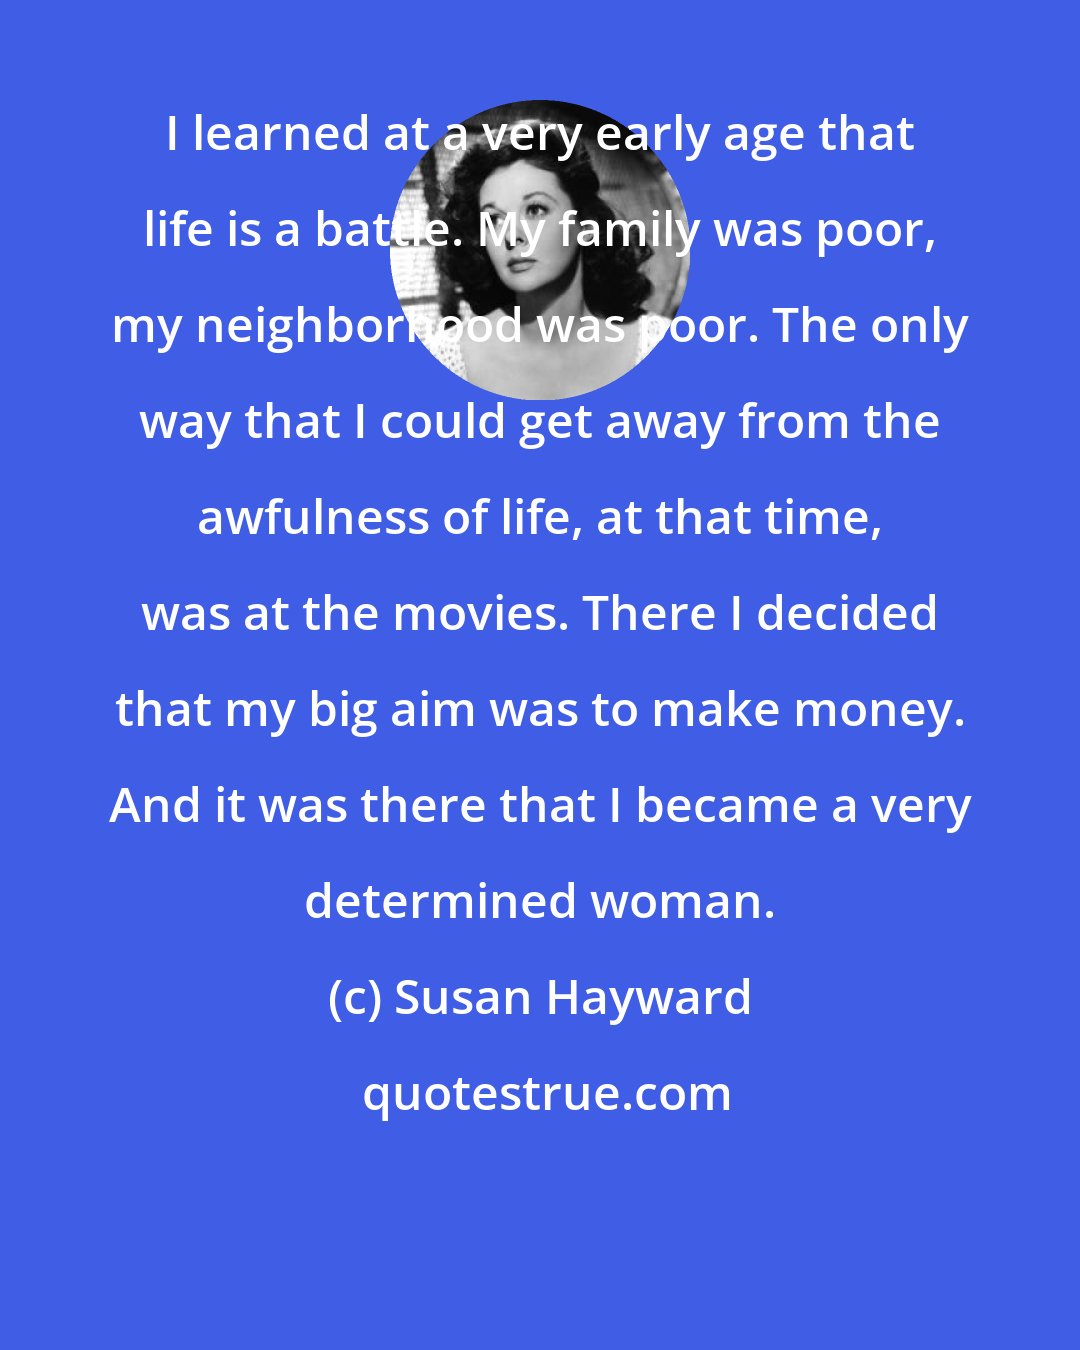 Susan Hayward: I learned at a very early age that life is a battle. My family was poor, my neighborhood was poor. The only way that I could get away from the awfulness of life, at that time, was at the movies. There I decided that my big aim was to make money. And it was there that I became a very determined woman.